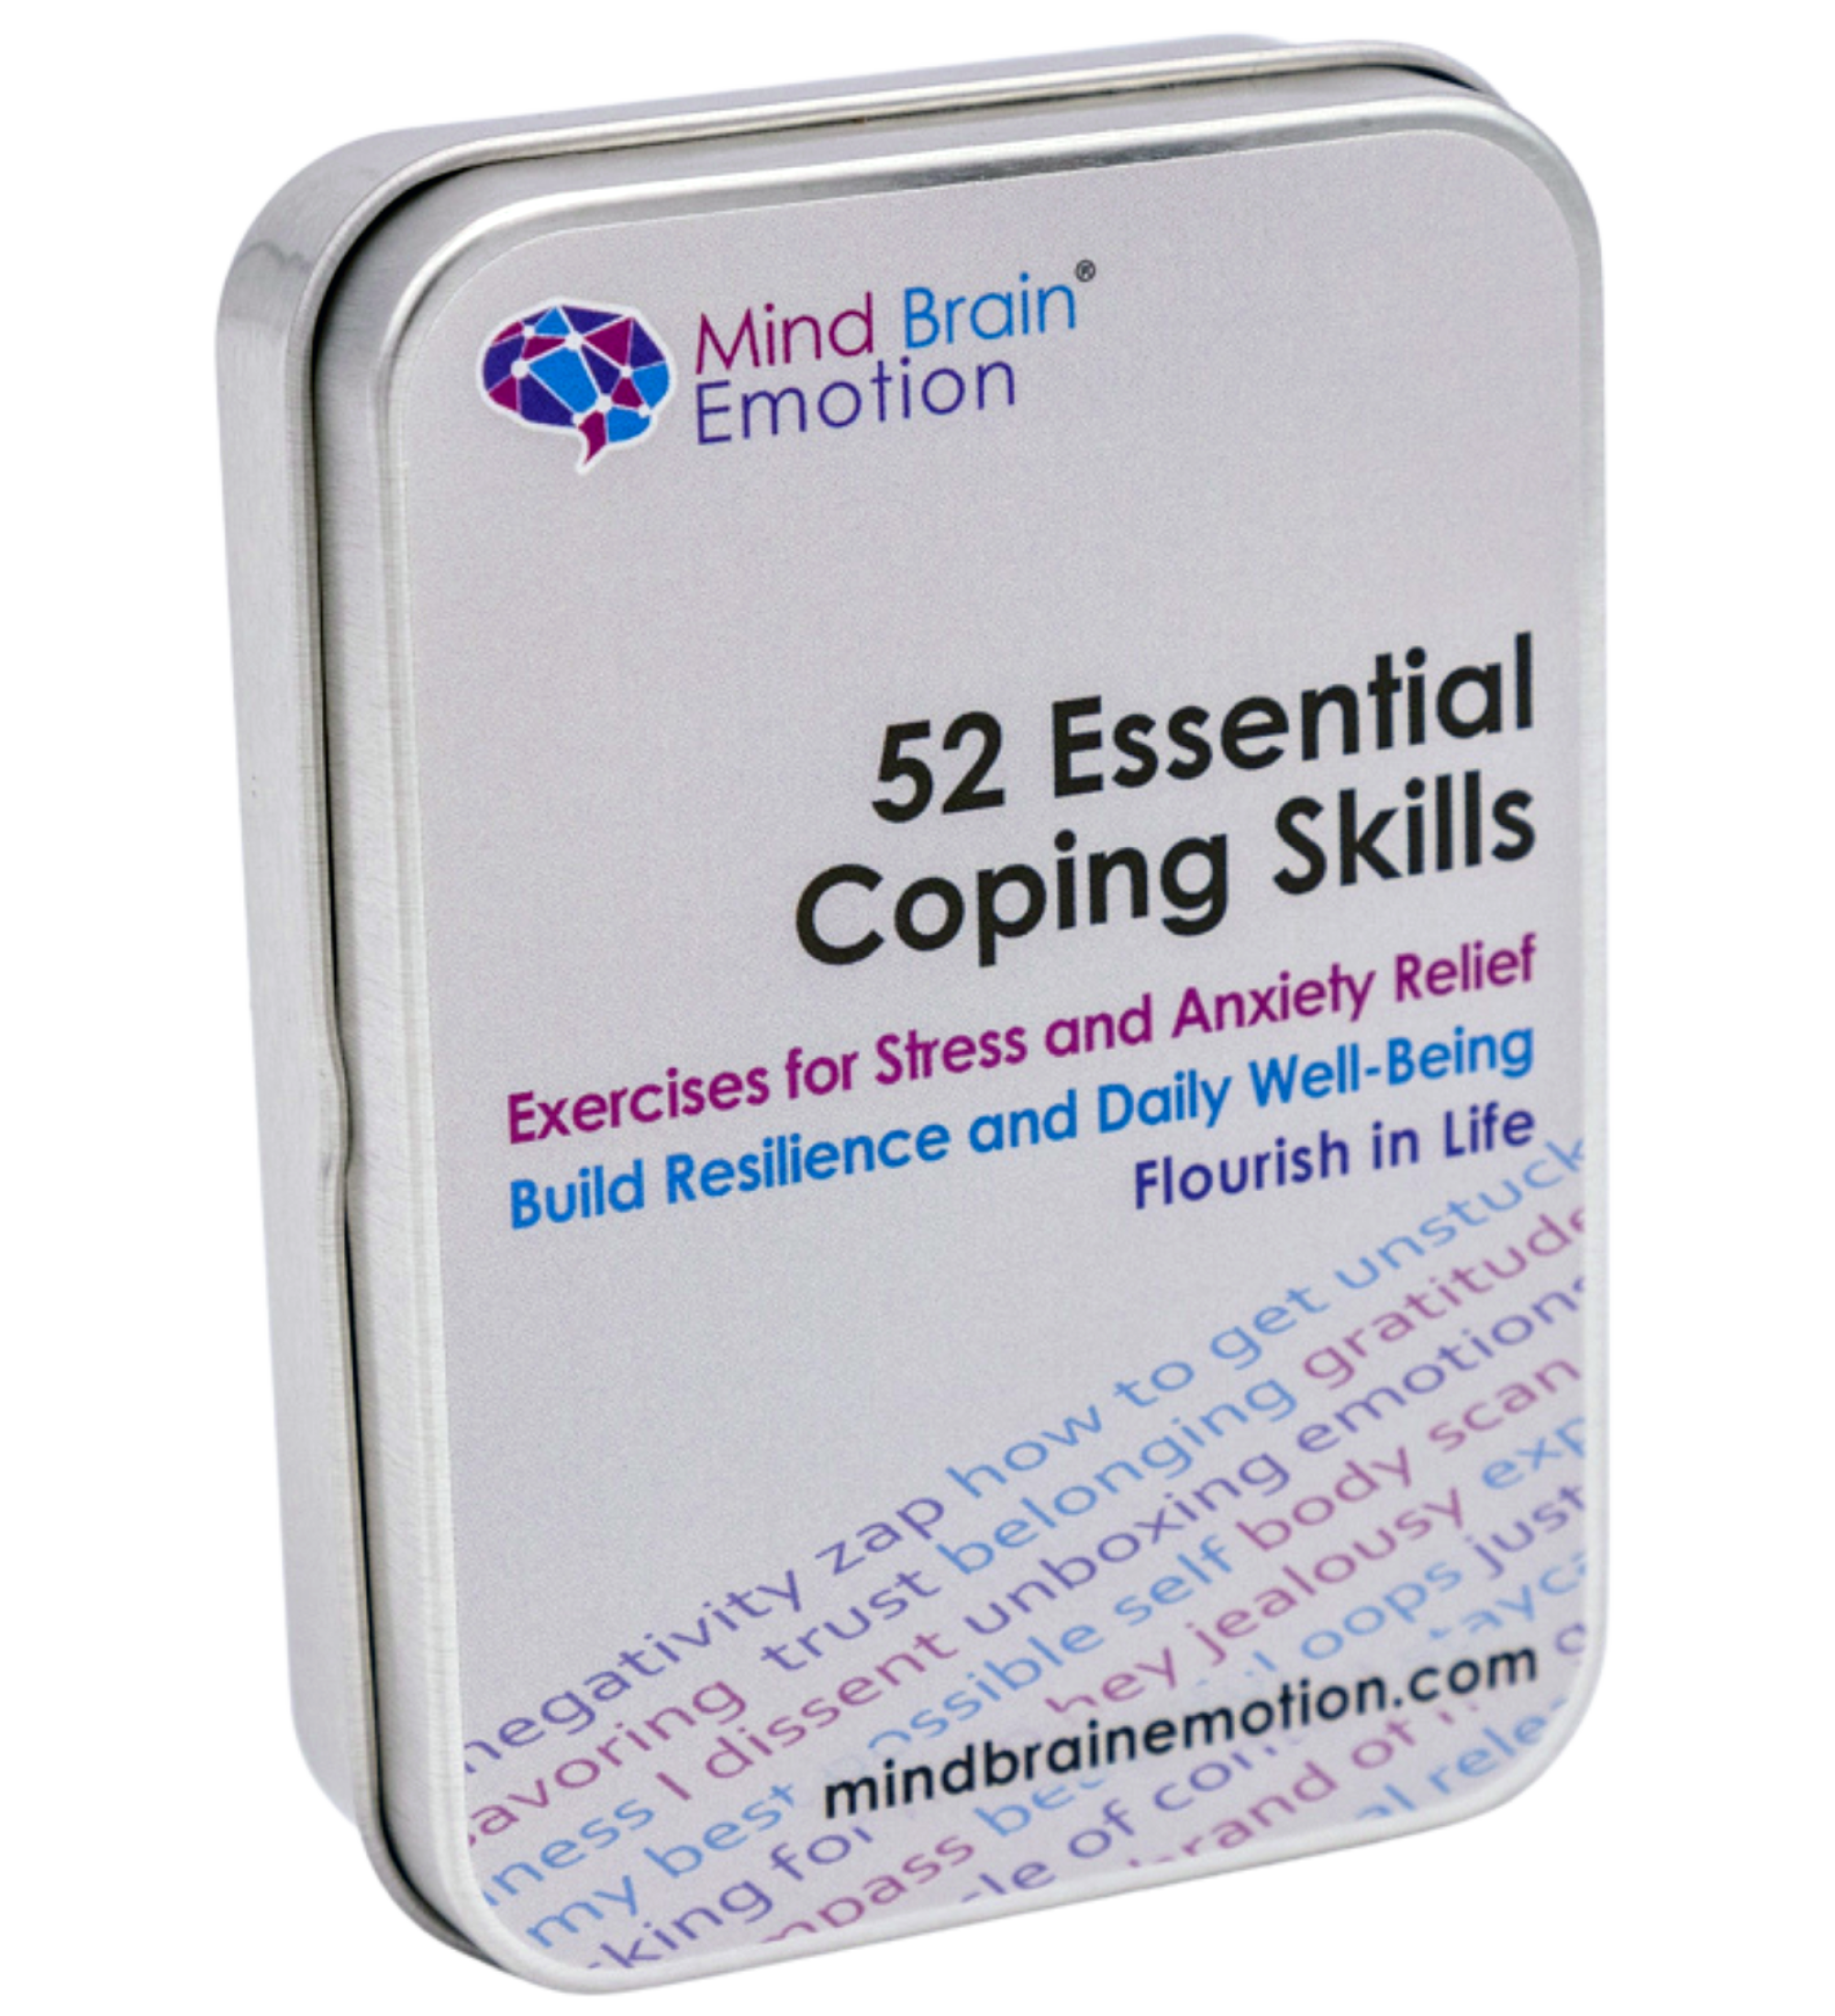 A tin contains Mind Brain Emotion’s 52 Essential Coping Skills cards